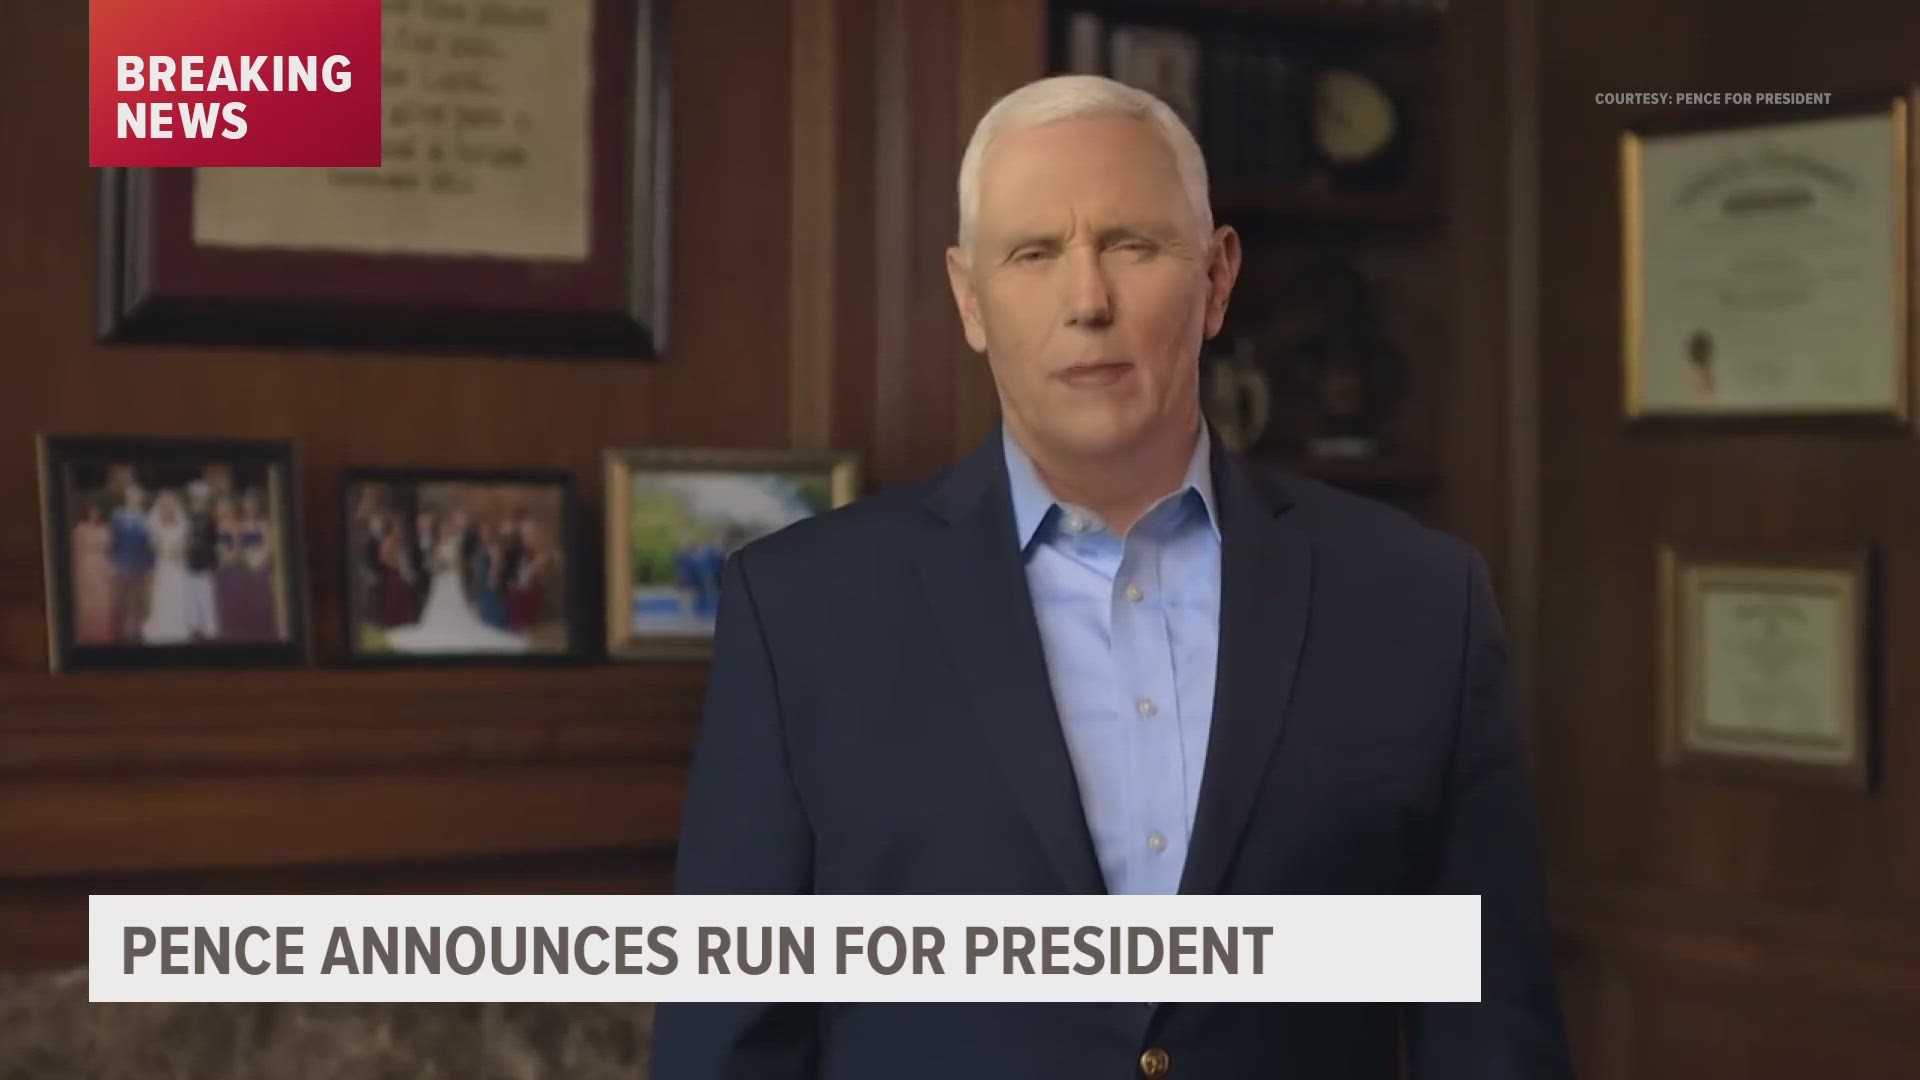 Pence says ‘Different times call for different leadership’ in video launching 2024 presidential bid